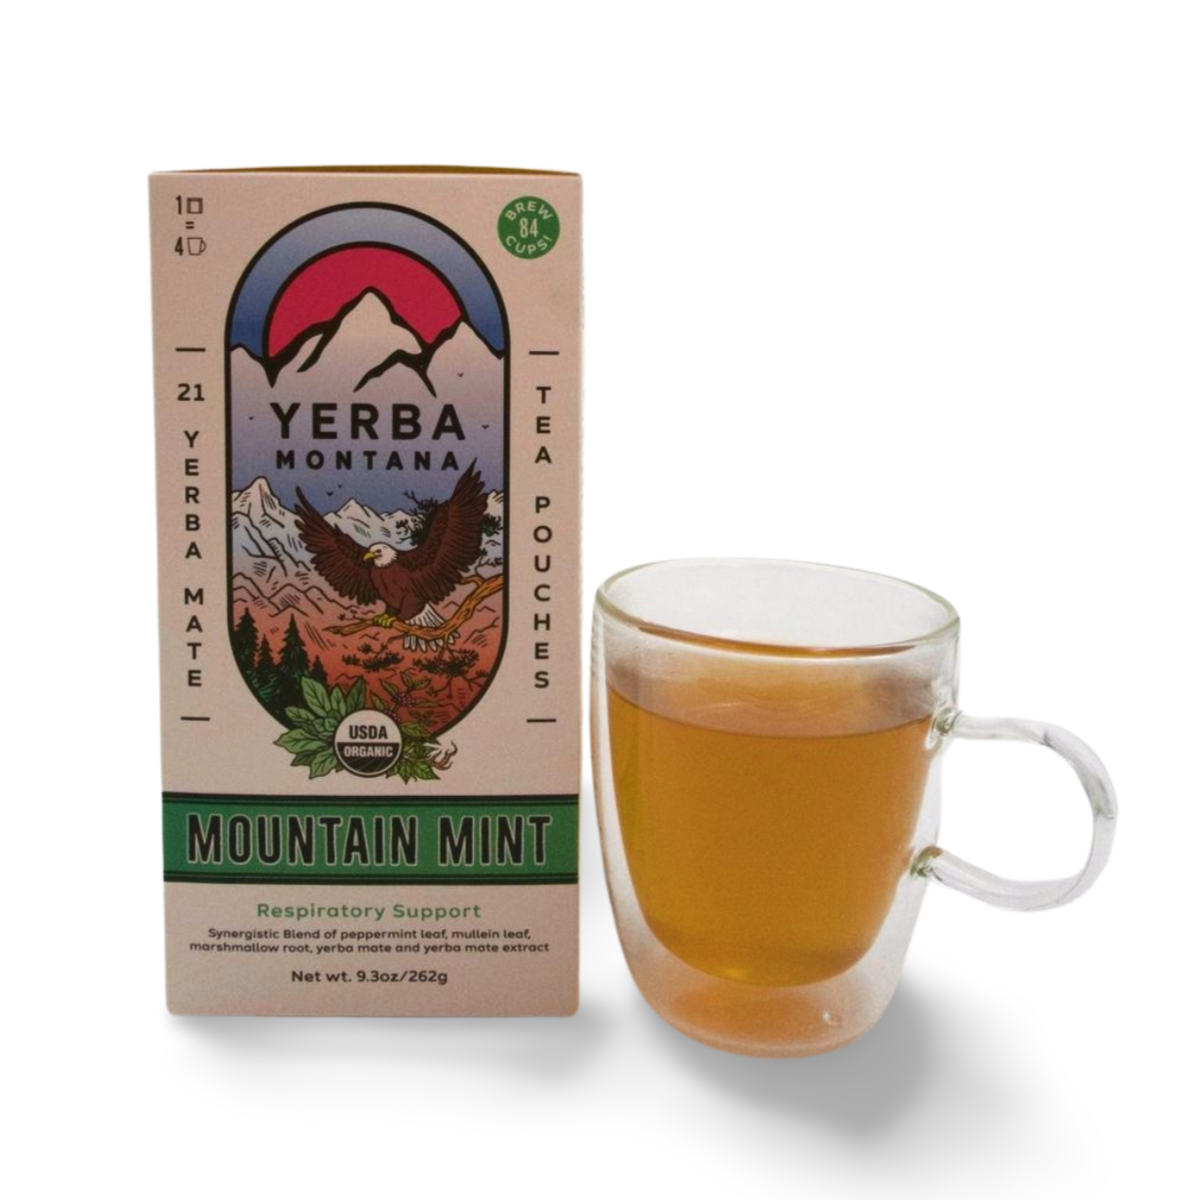 Mountain mint yerba mate tea bag pouches with peppermint leaf, mullein leaf and marshmallow root.